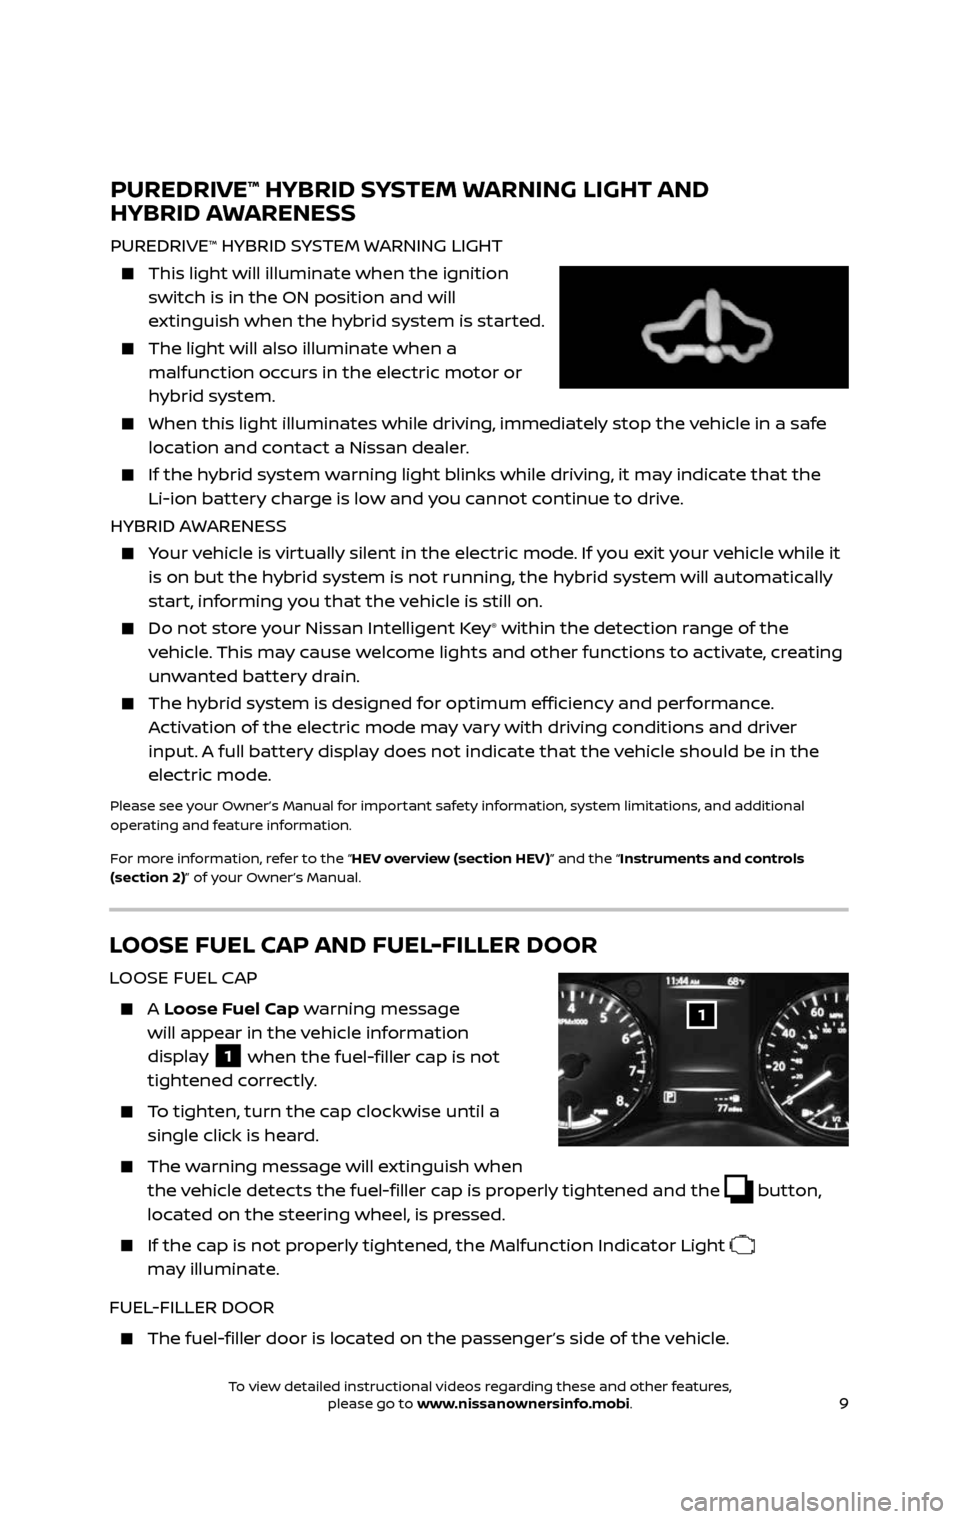 NISSAN ROGUE HYBRID 2017 2.G Quick Reference Guide 9
LOOSE FUEL CAP AND FUEL-FILLER DOOR
LOOSE FUEL CAP
    A Loose Fuel Cap warning message  
will appear in the vehicle information 
display 
1 when the fuel-filler cap is not 
tightened correctly.
  